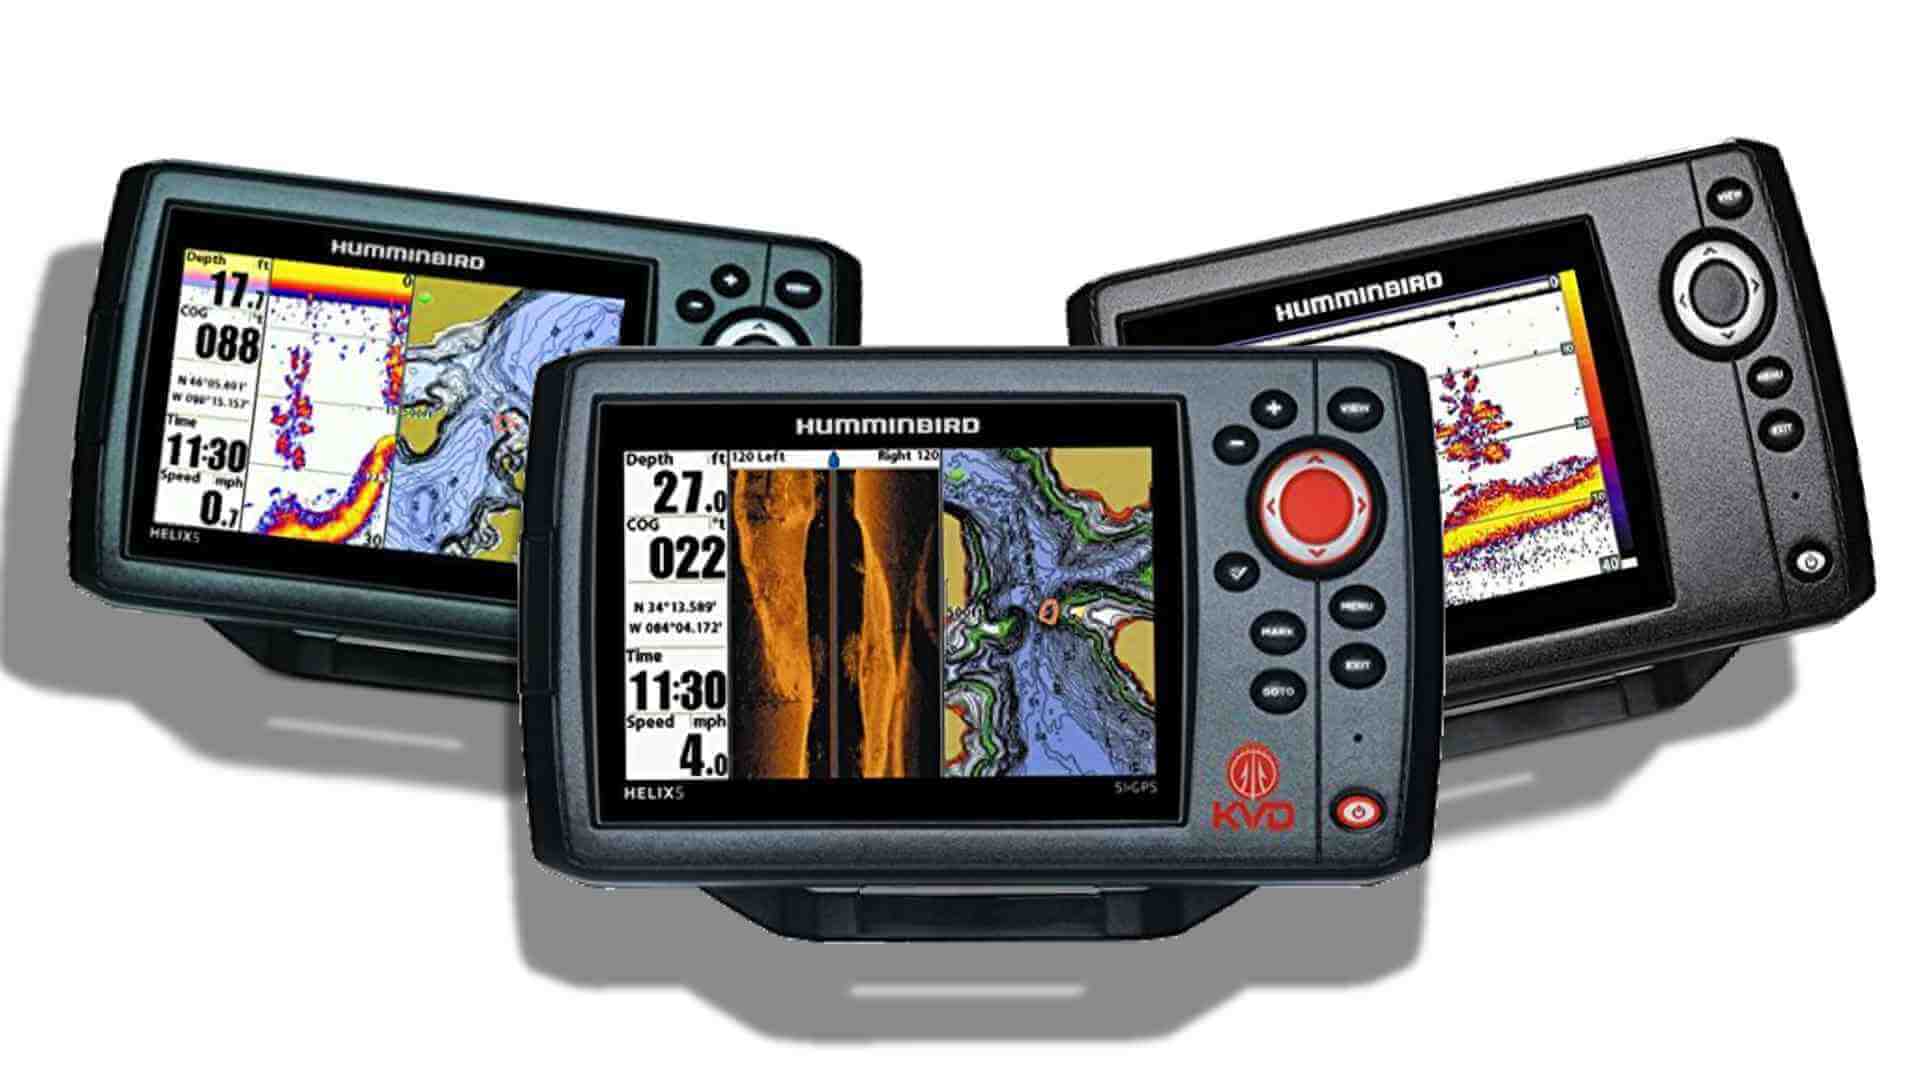 HUMMINBIRD HELIX 5 Product Review